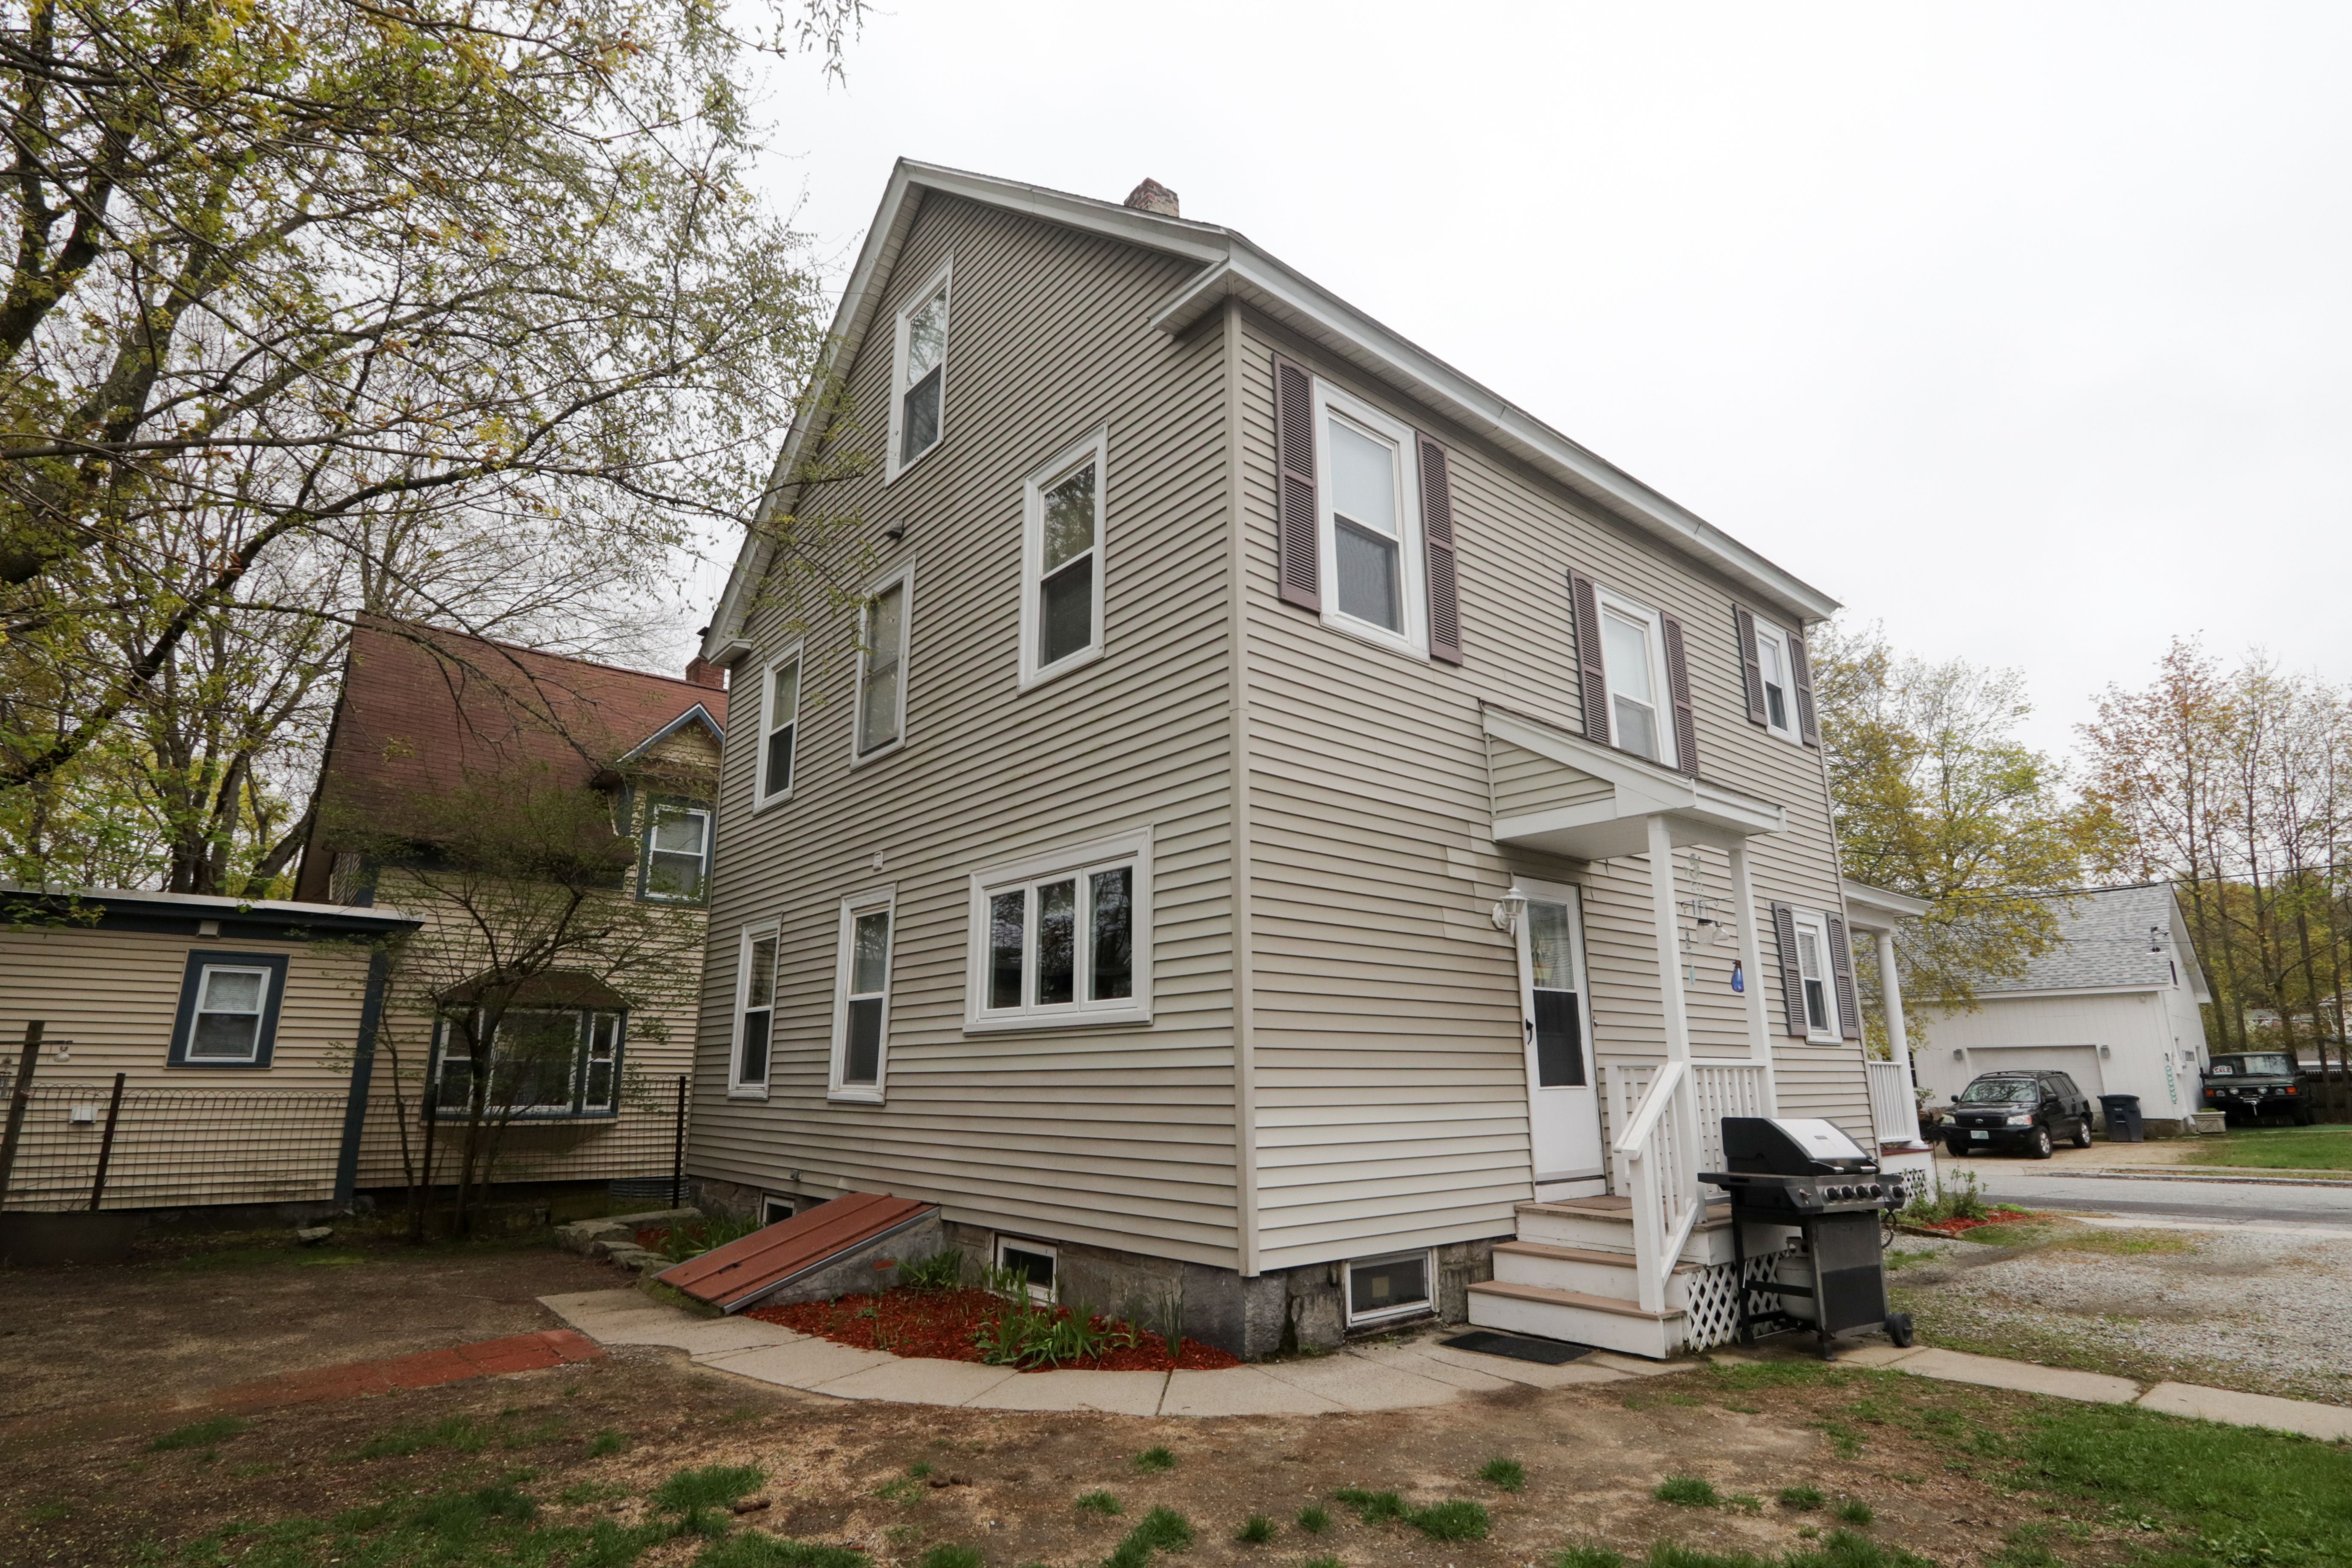 South Nashua House for Sale 34.5 Russell Ave Nashua NH 03060 side